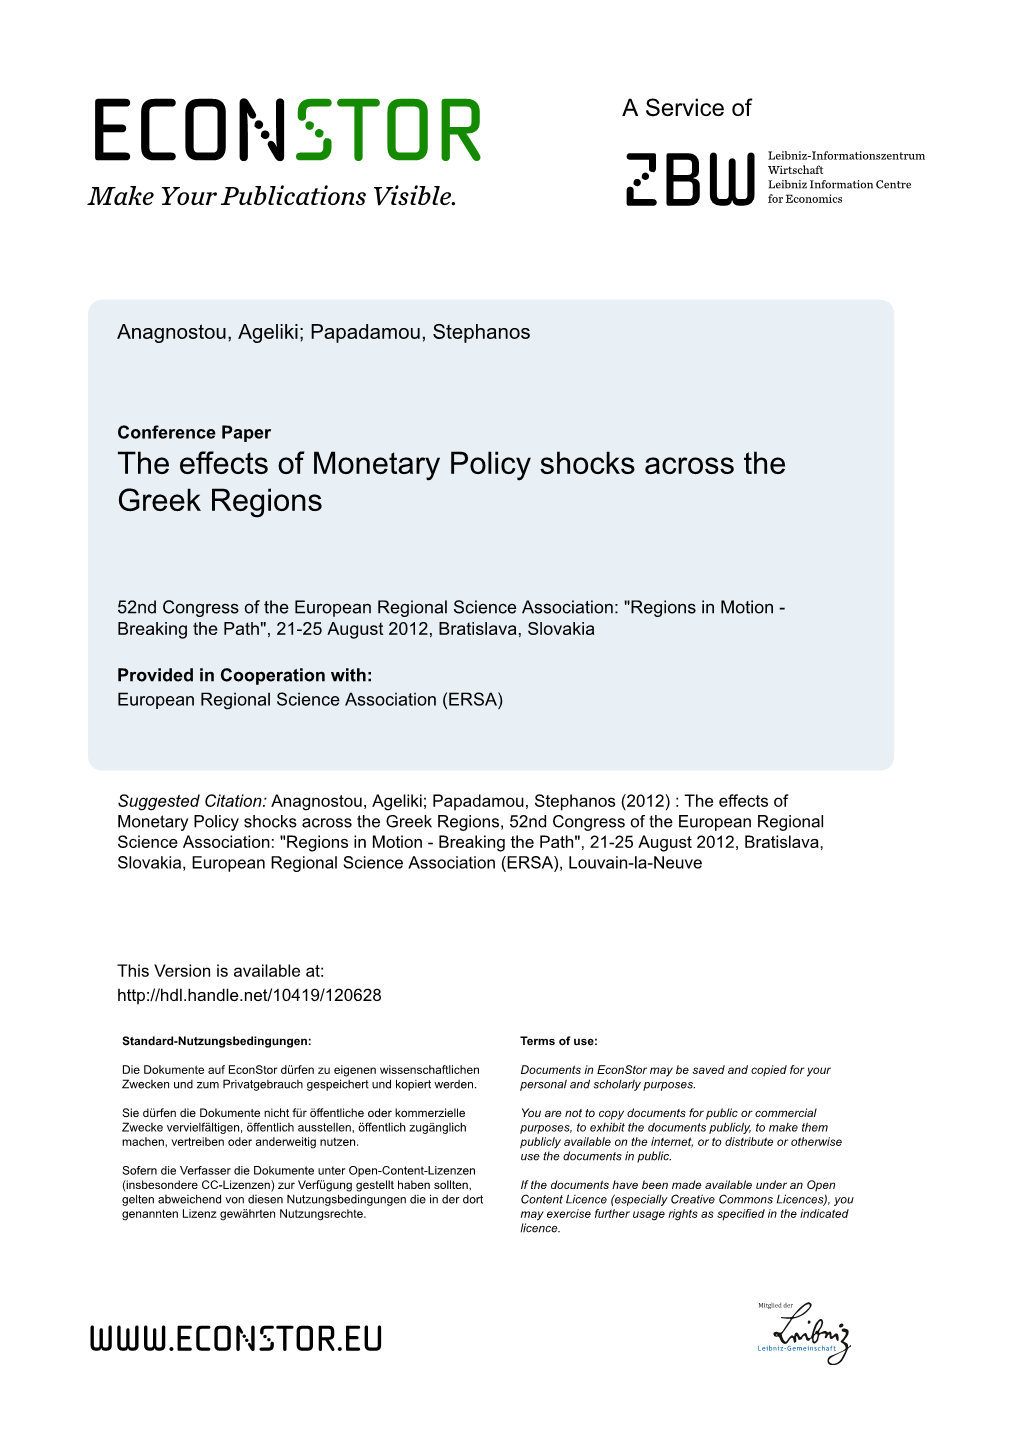 The Effects of Monetary Policy Shocks Across the Greek Regions